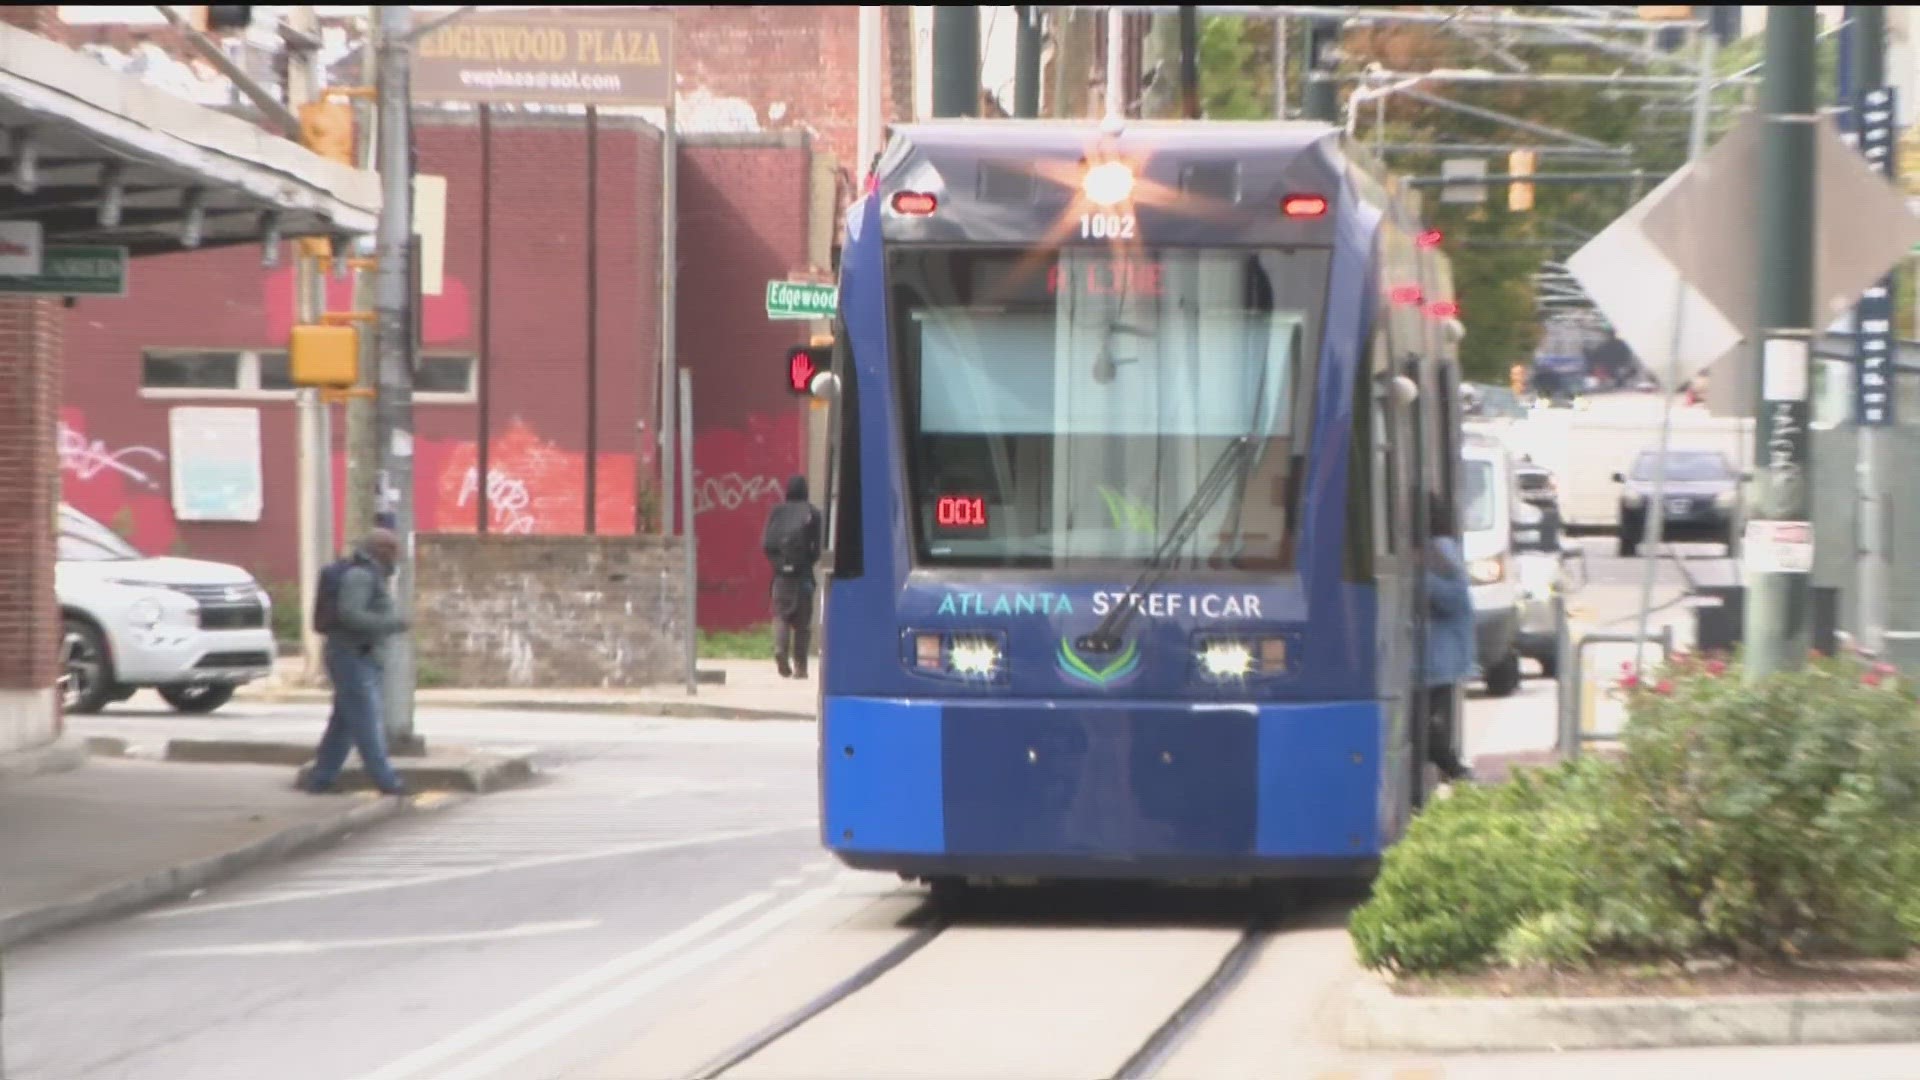 MARTA is looking at expanding its streetcar line.